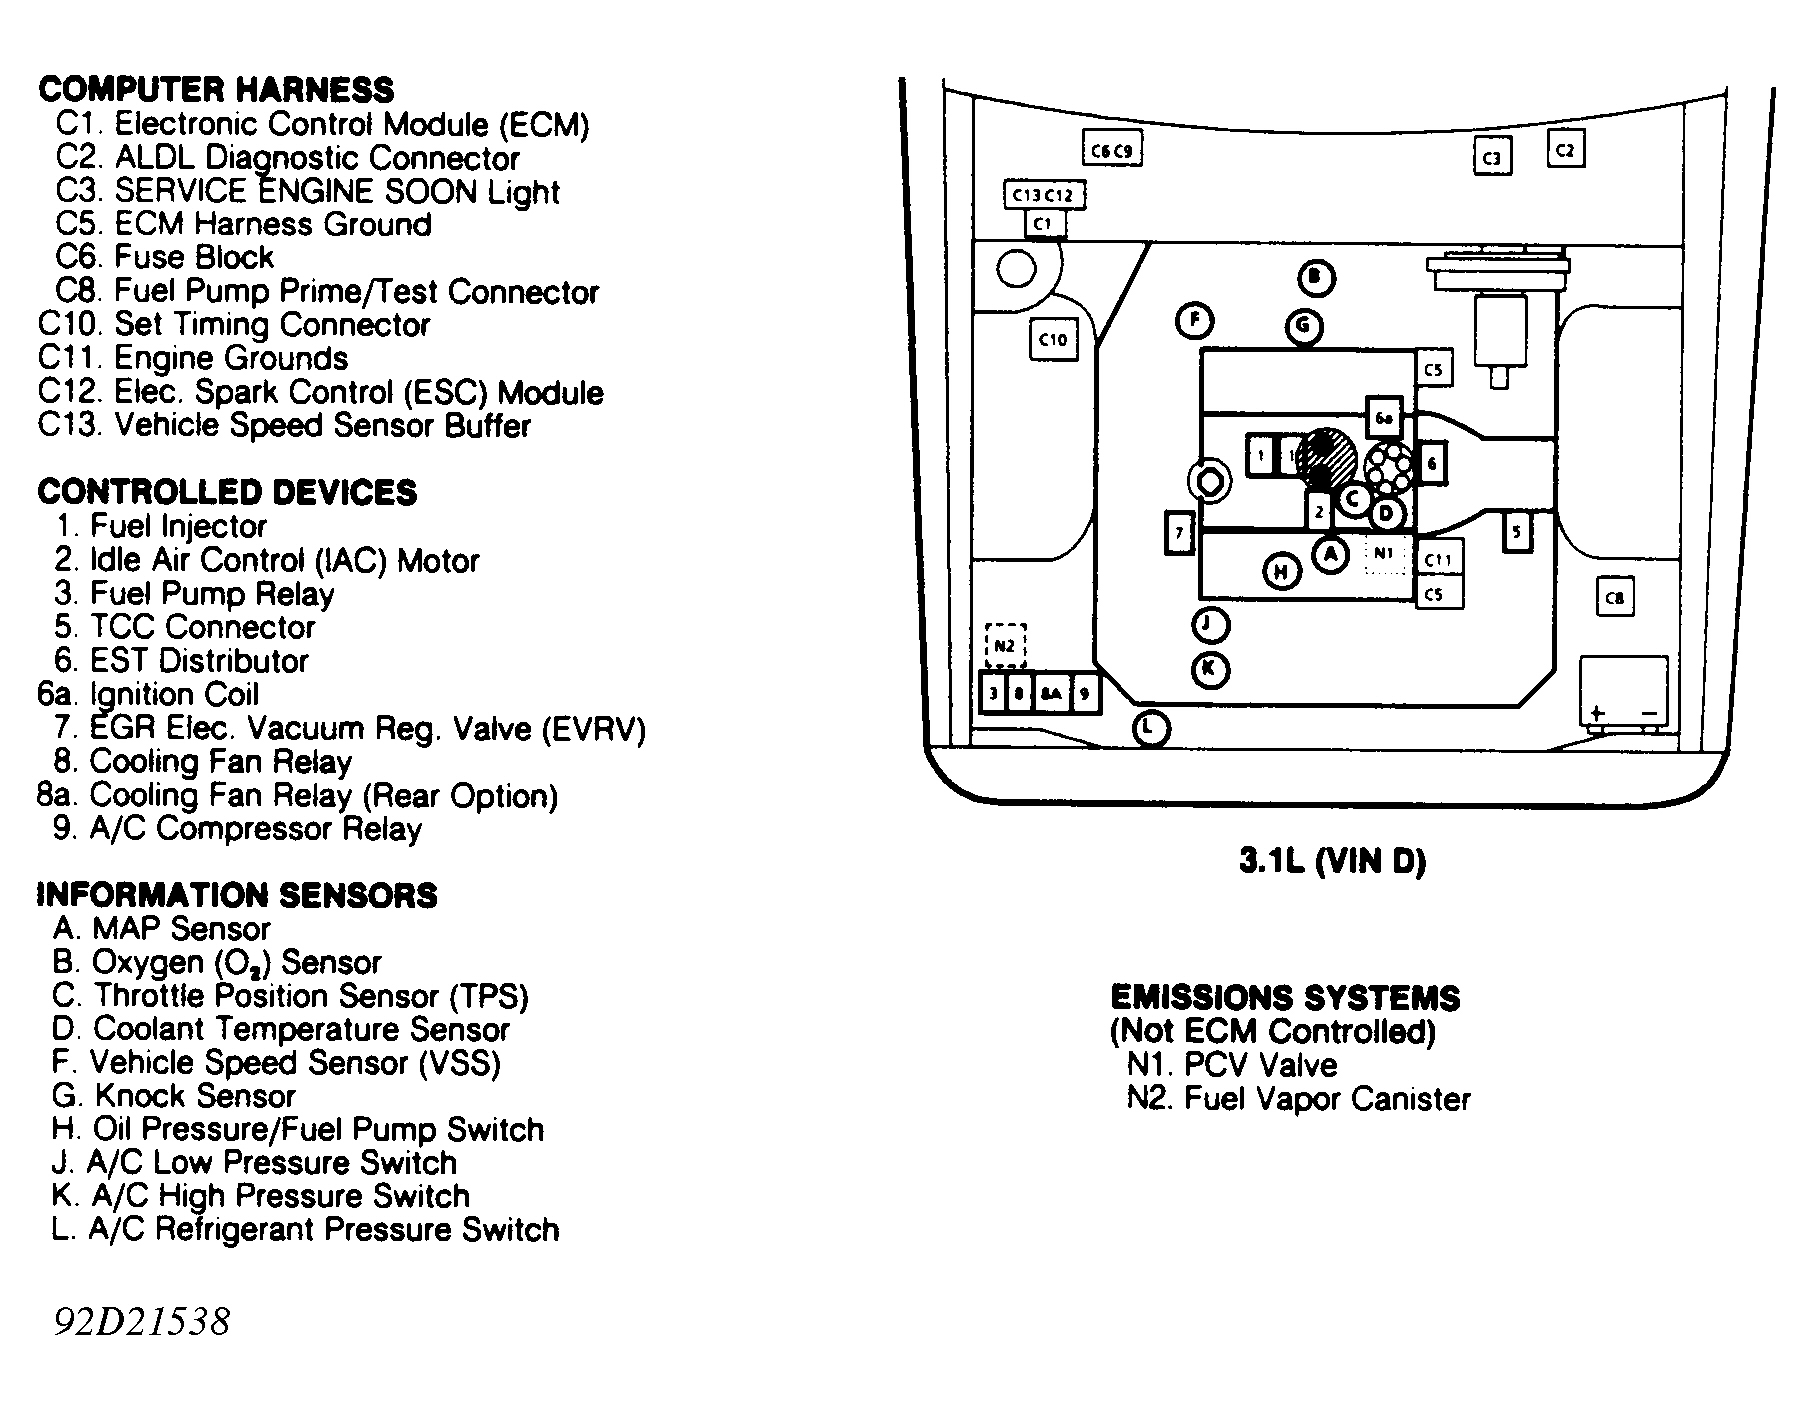 Chevrolet APV 1992 - Component Locations -  Component Locations (1 Of 2)